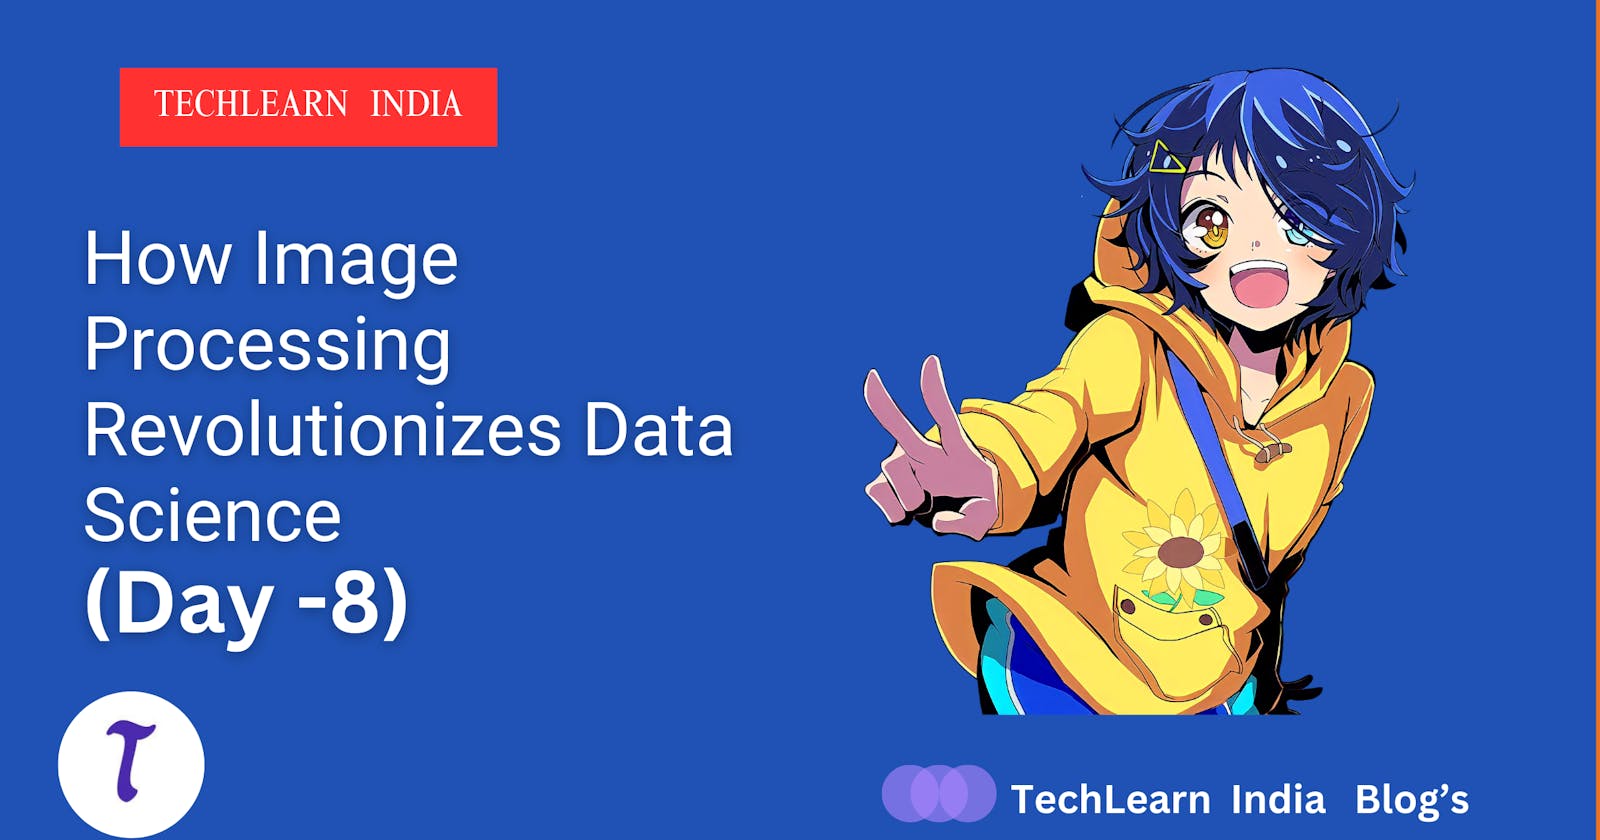 How Image Processing Revolutionizes Data Science -( Day -8)